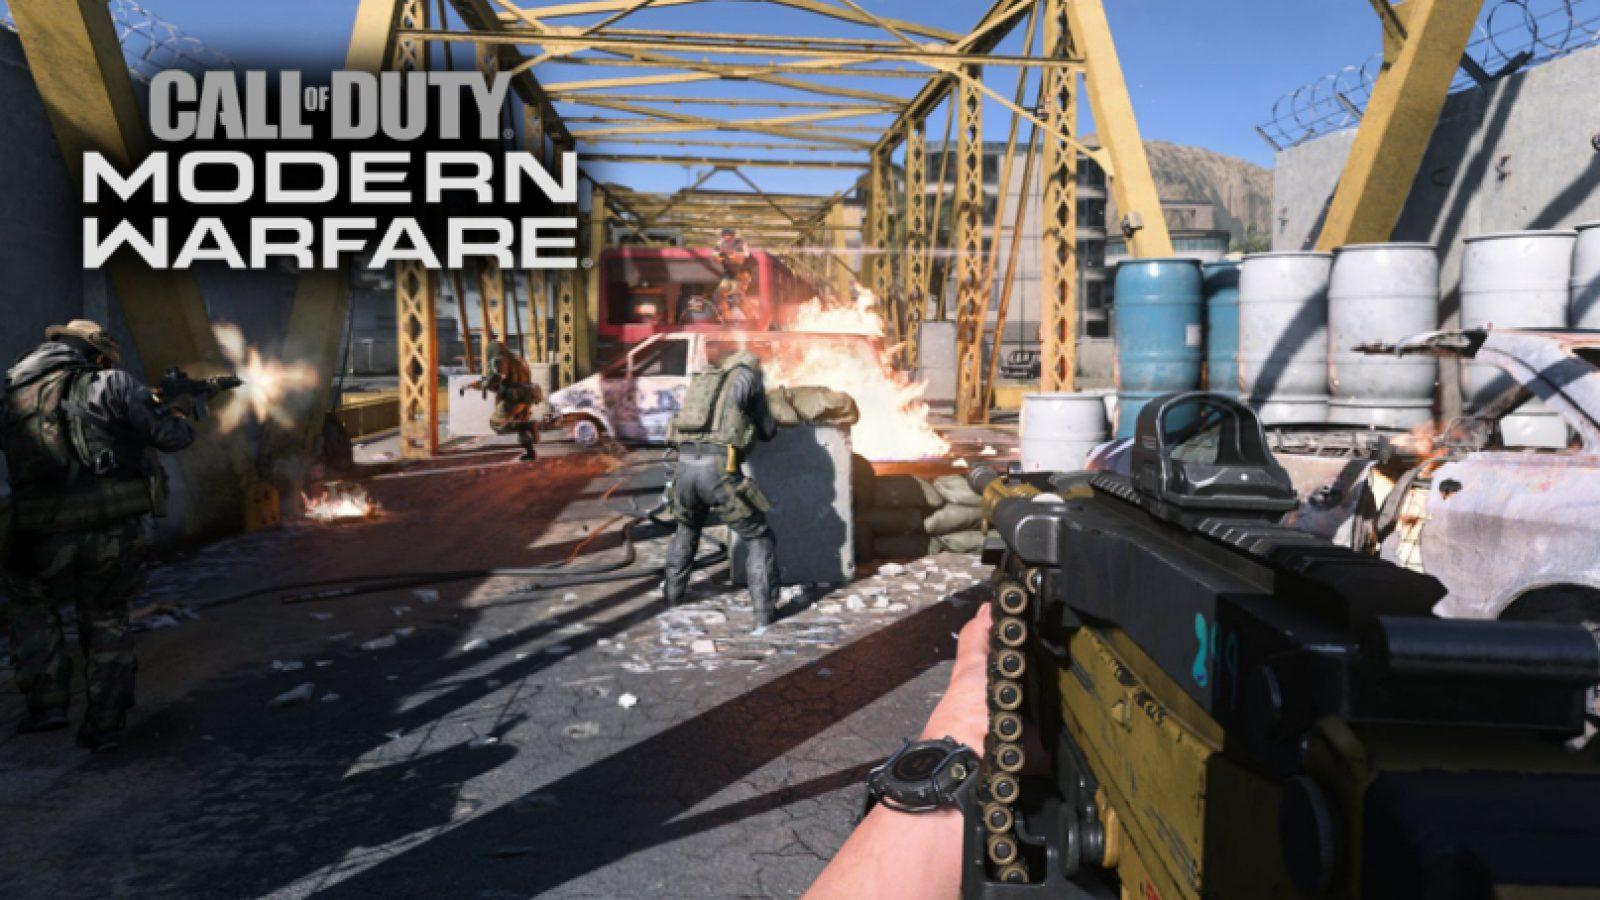 COD: Ghosts DLC dated for PS3, PS4, PC